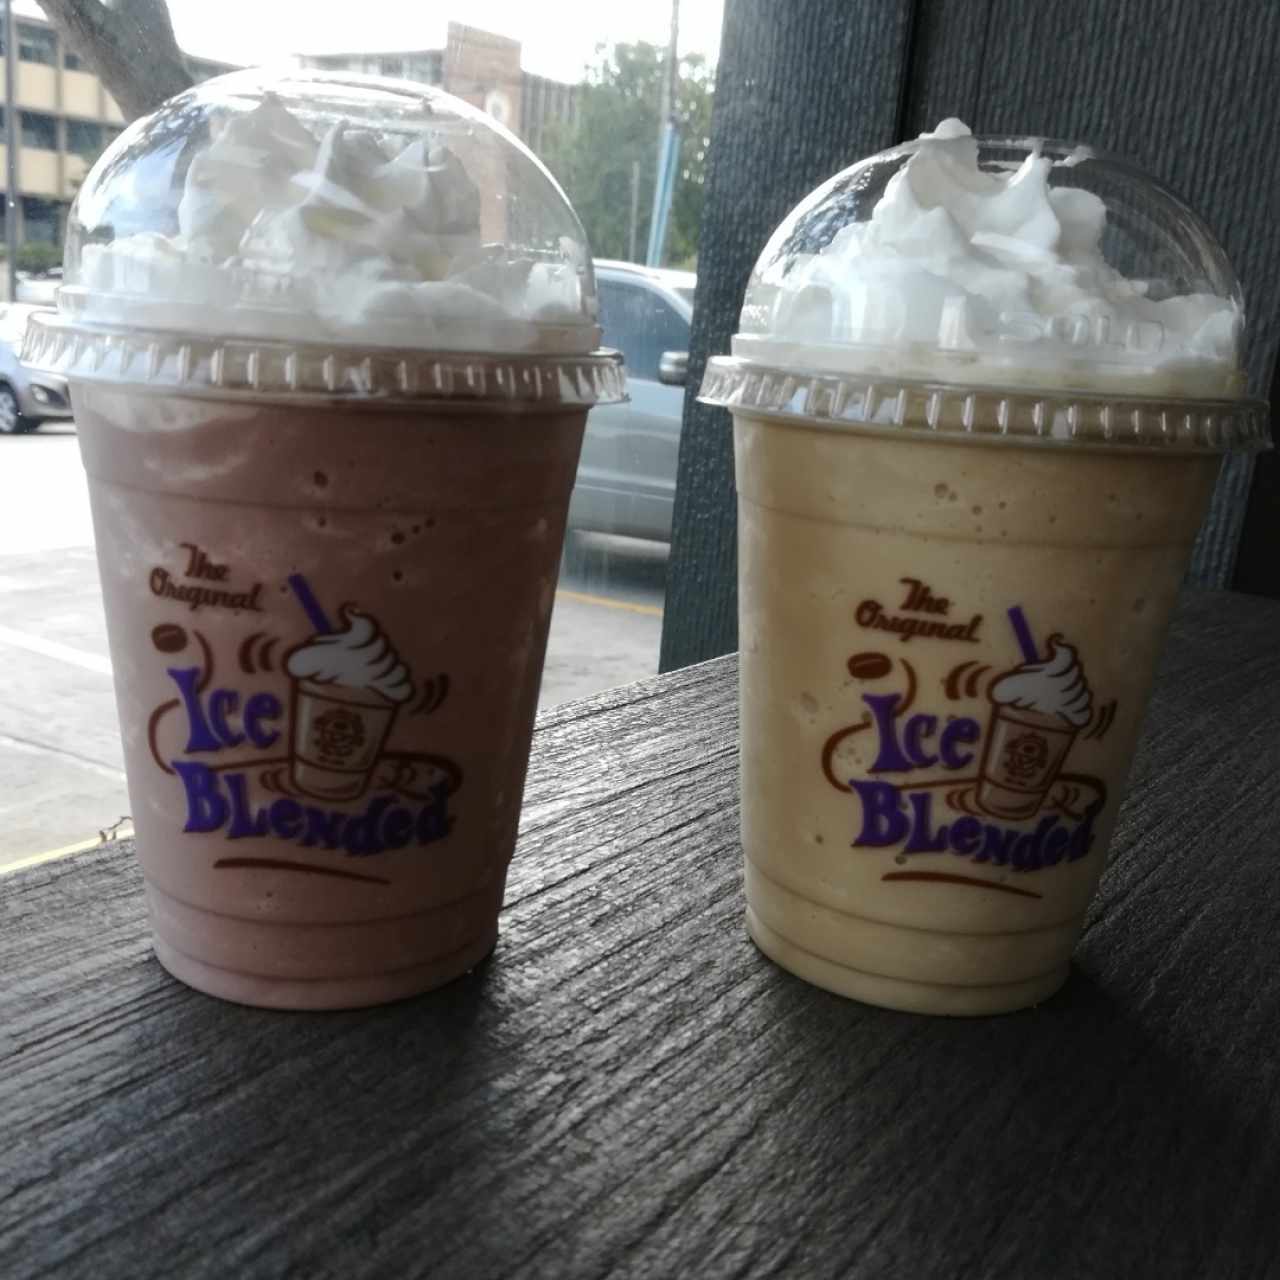 ice blended vainilla y pure chocolat